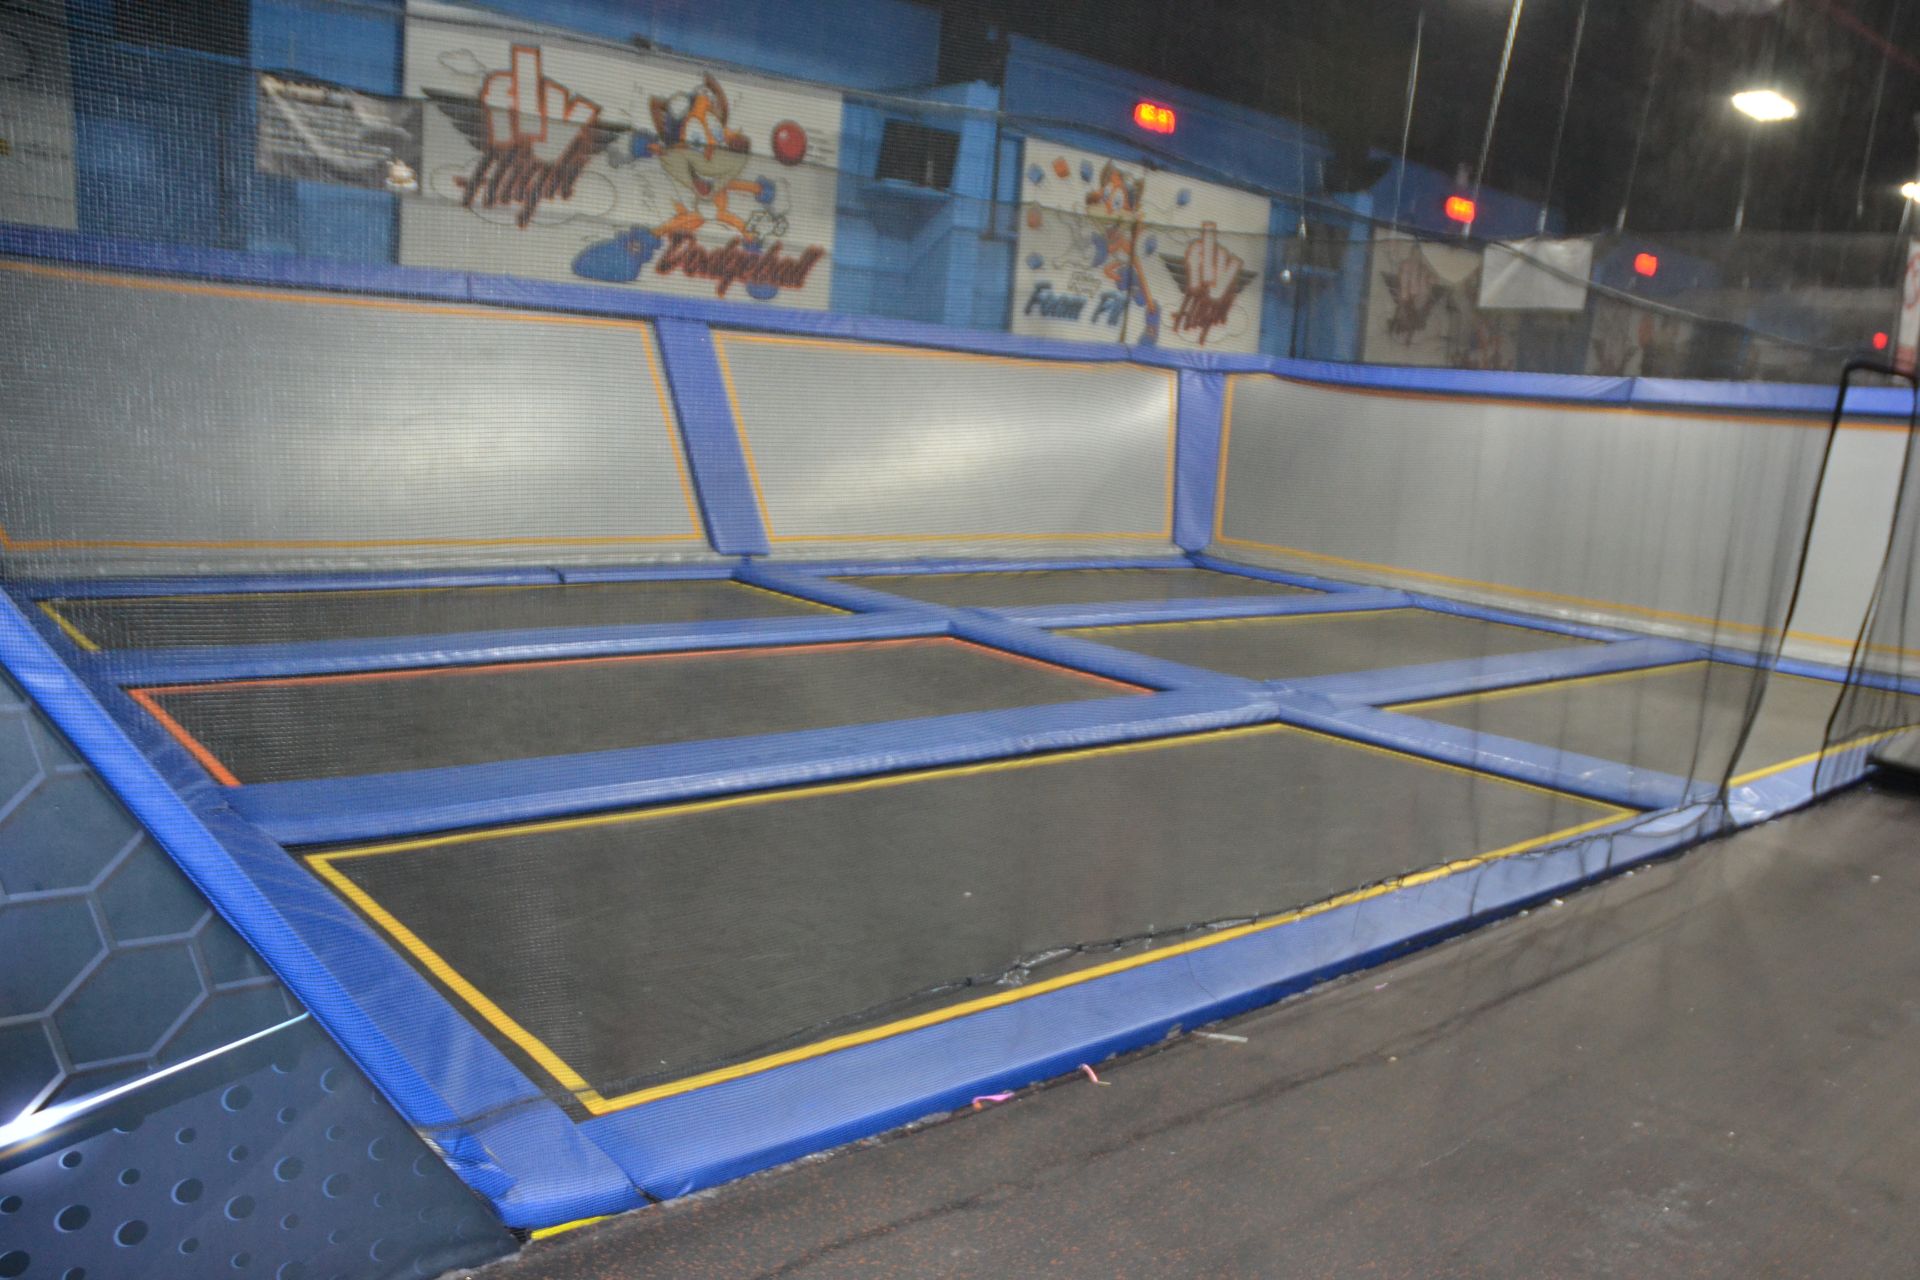 Trampoline Area Including: (6) 17 1/2' x 7 1/2' Trampolines, (4) Wall Trampolines), Netting &